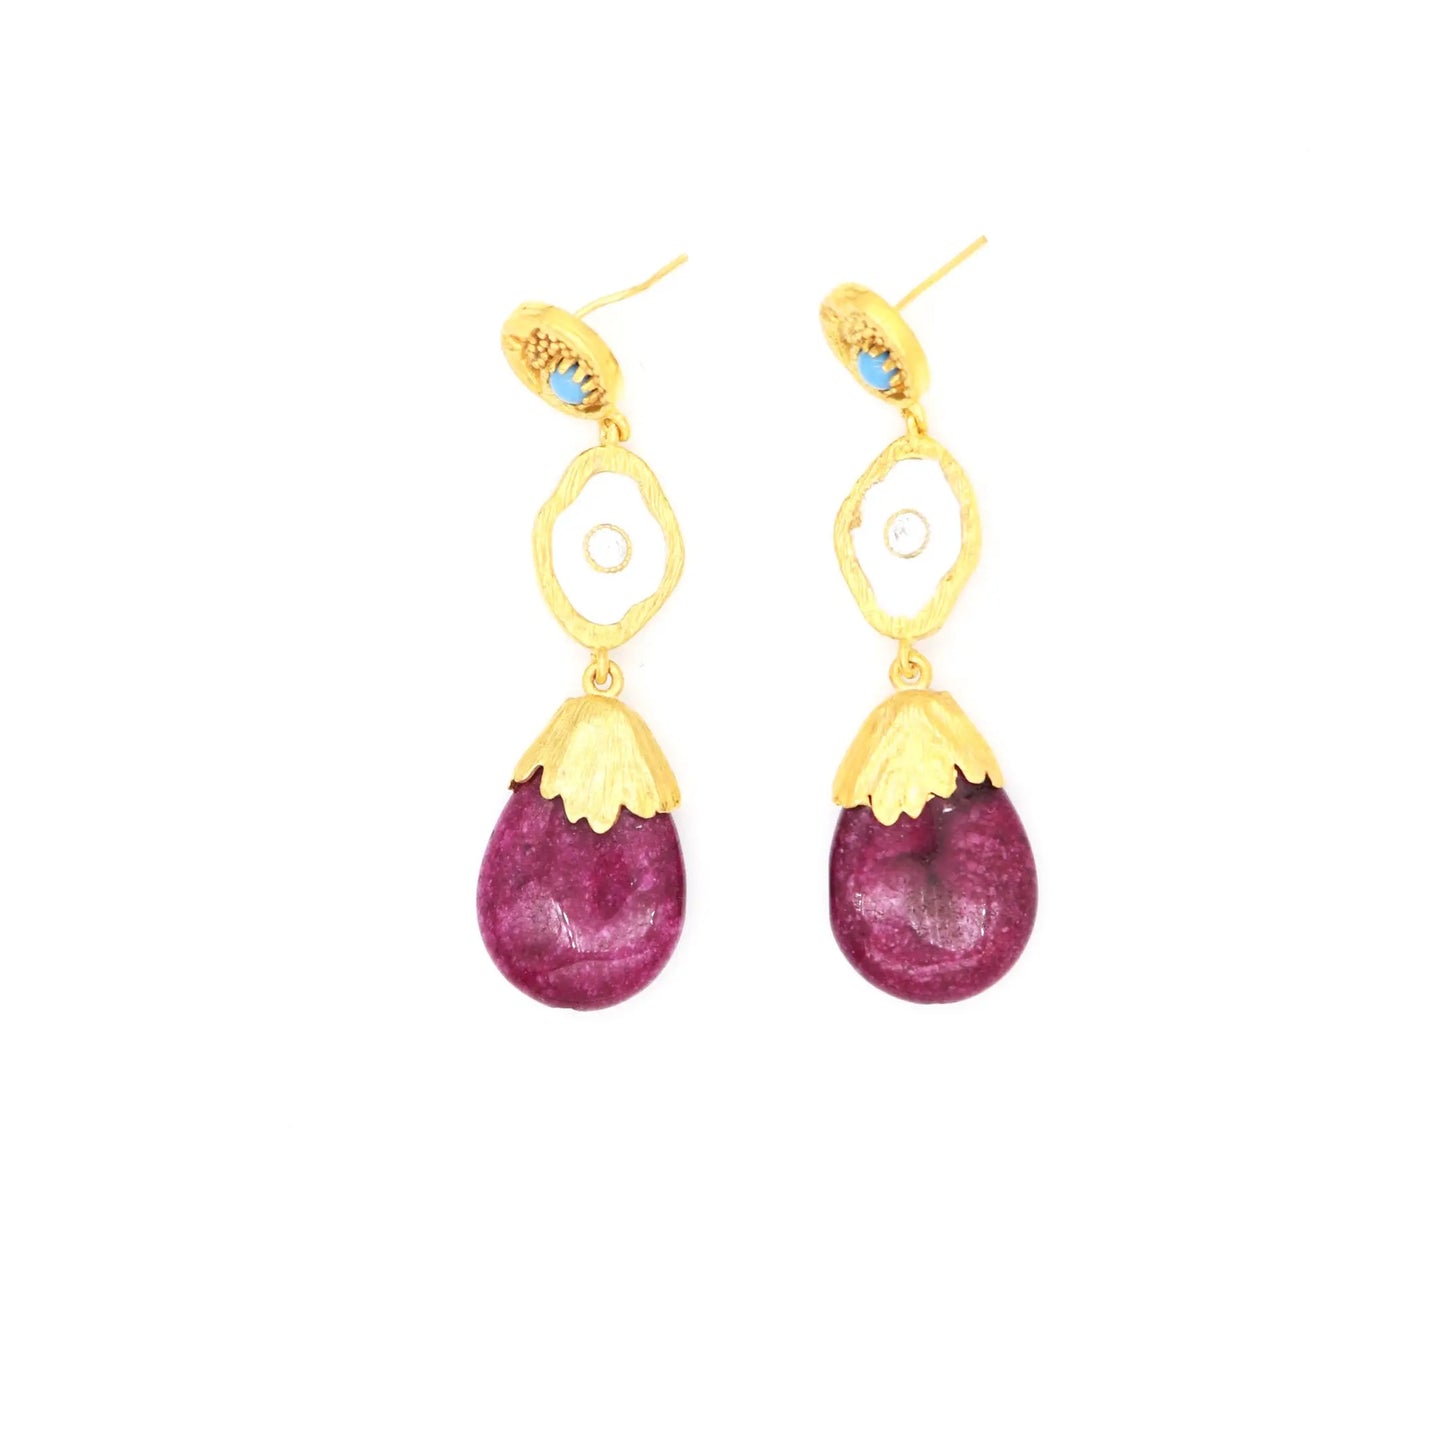 Limited Edition Brass Earrings - Lady D Jewels